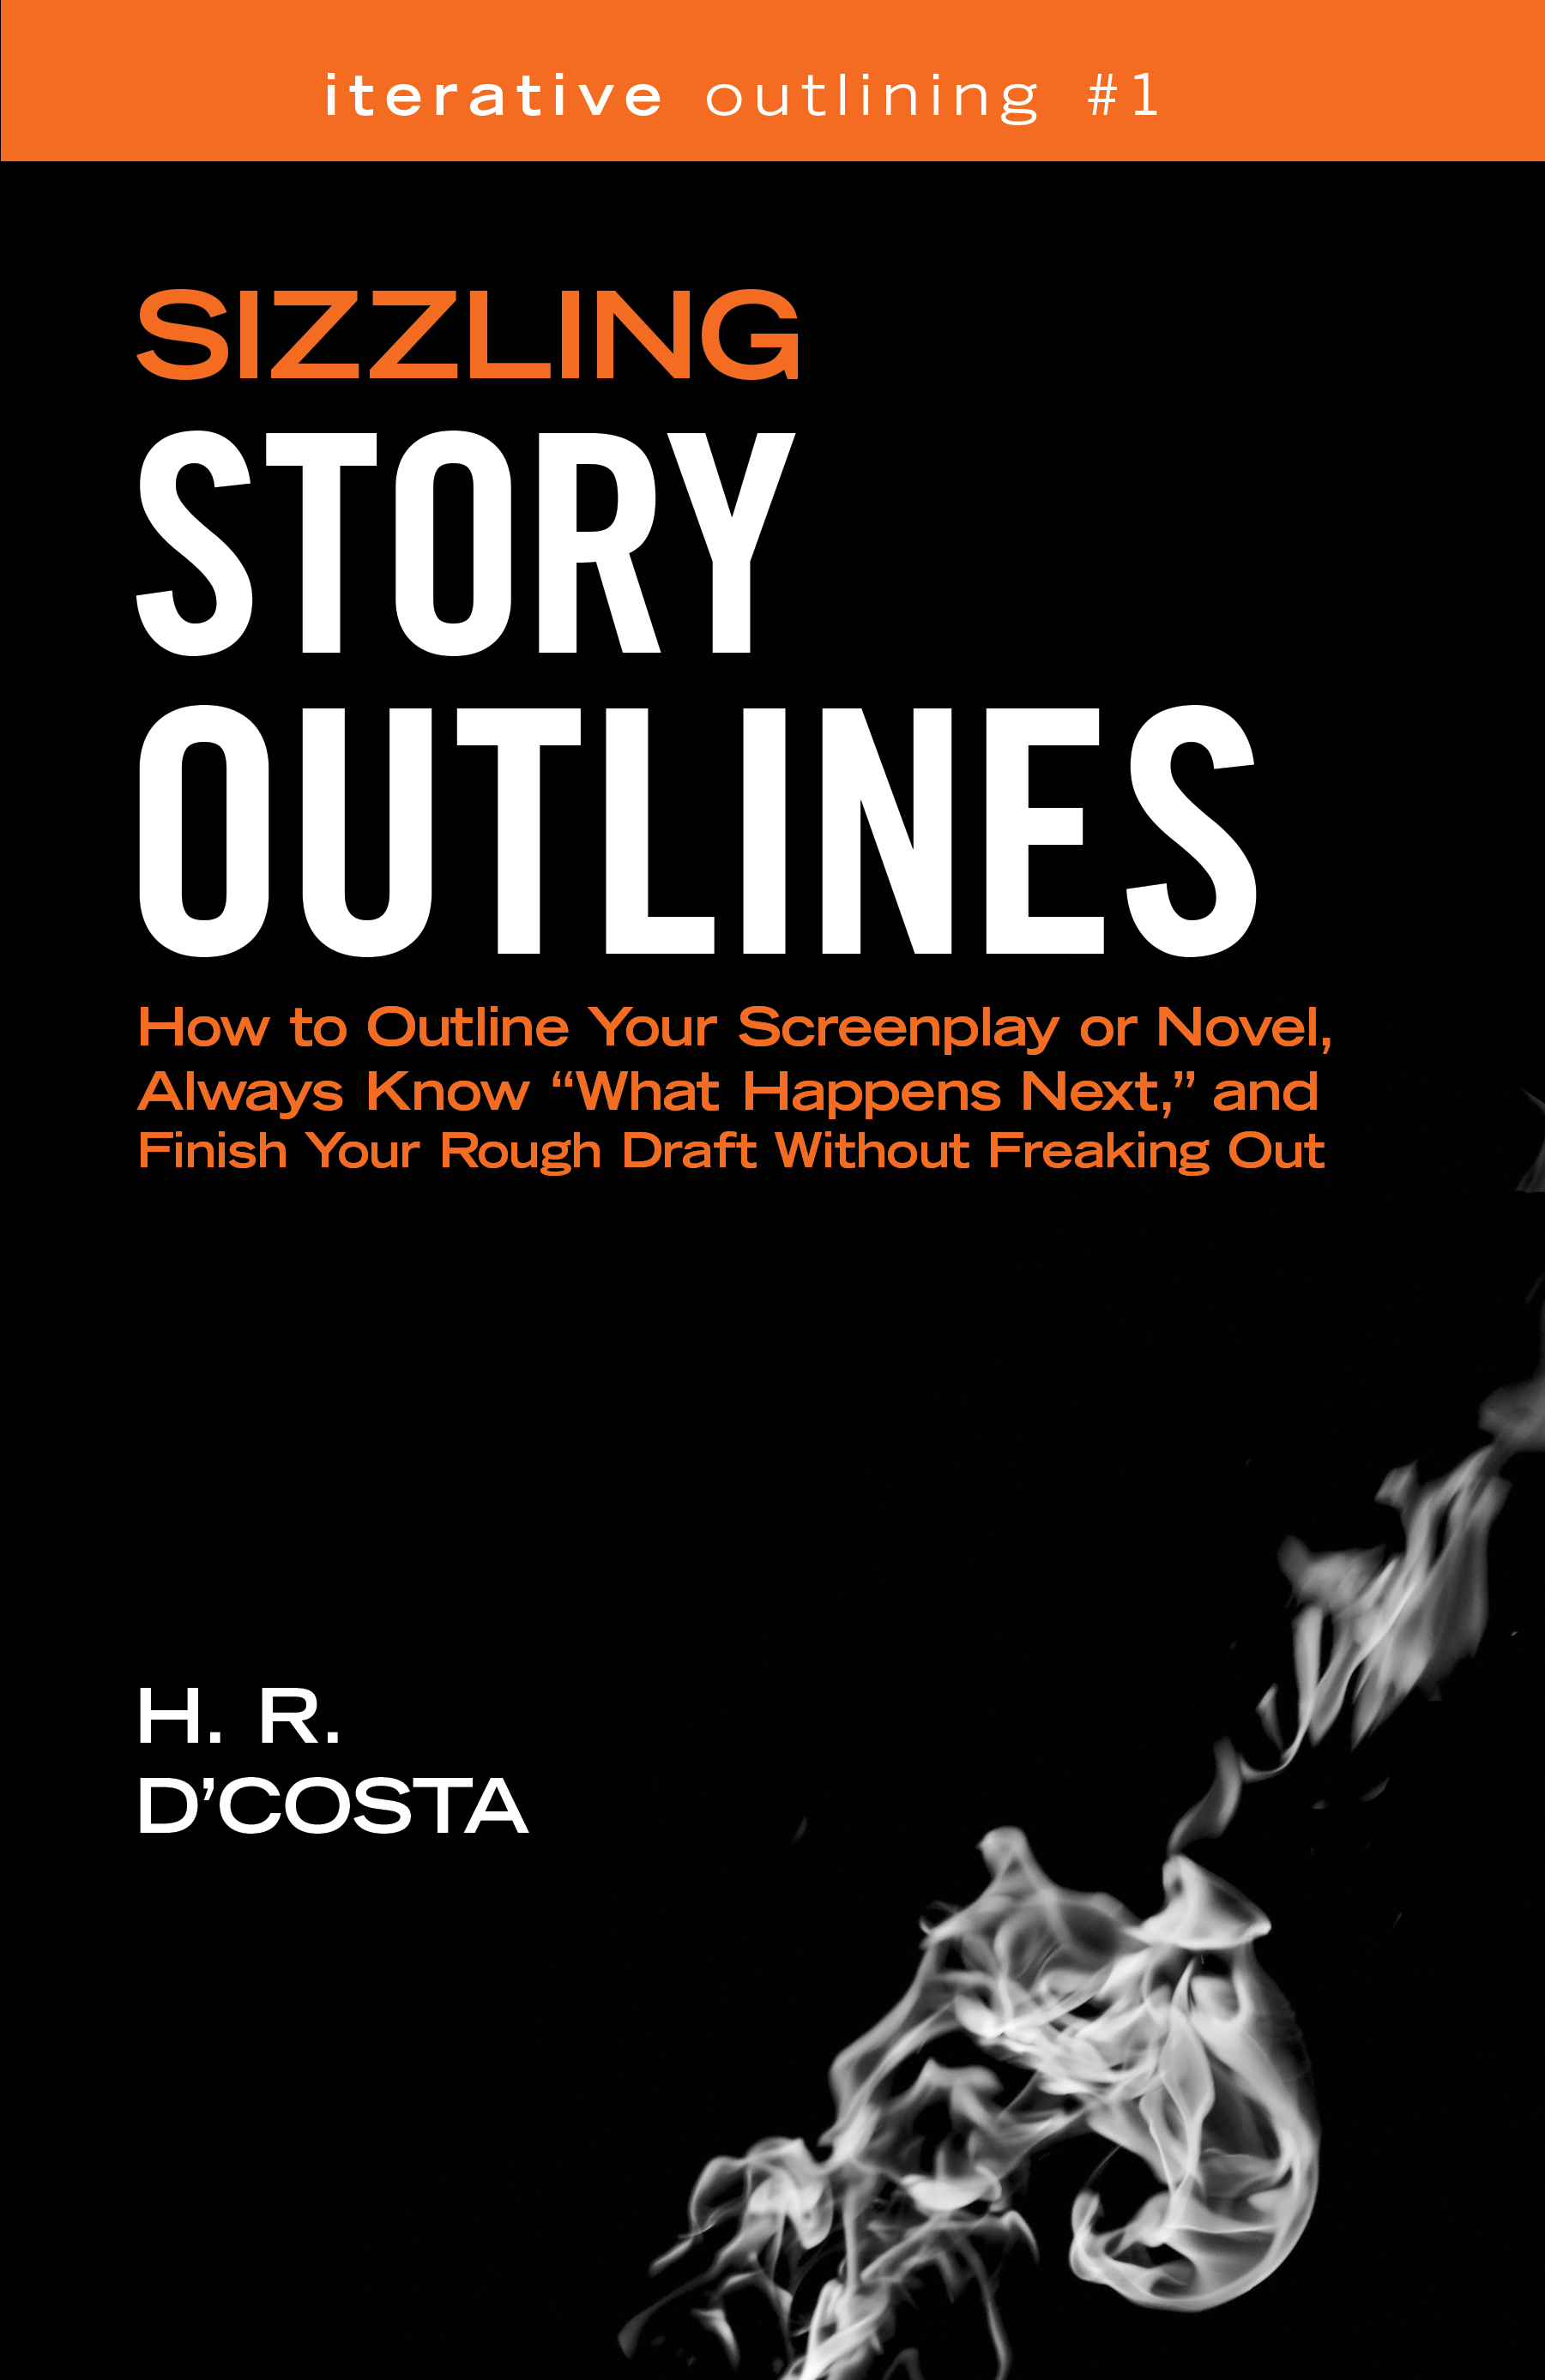 High-Res Cover Image (PNG) for Sizzling Story Outlines by H. R. D'Costa